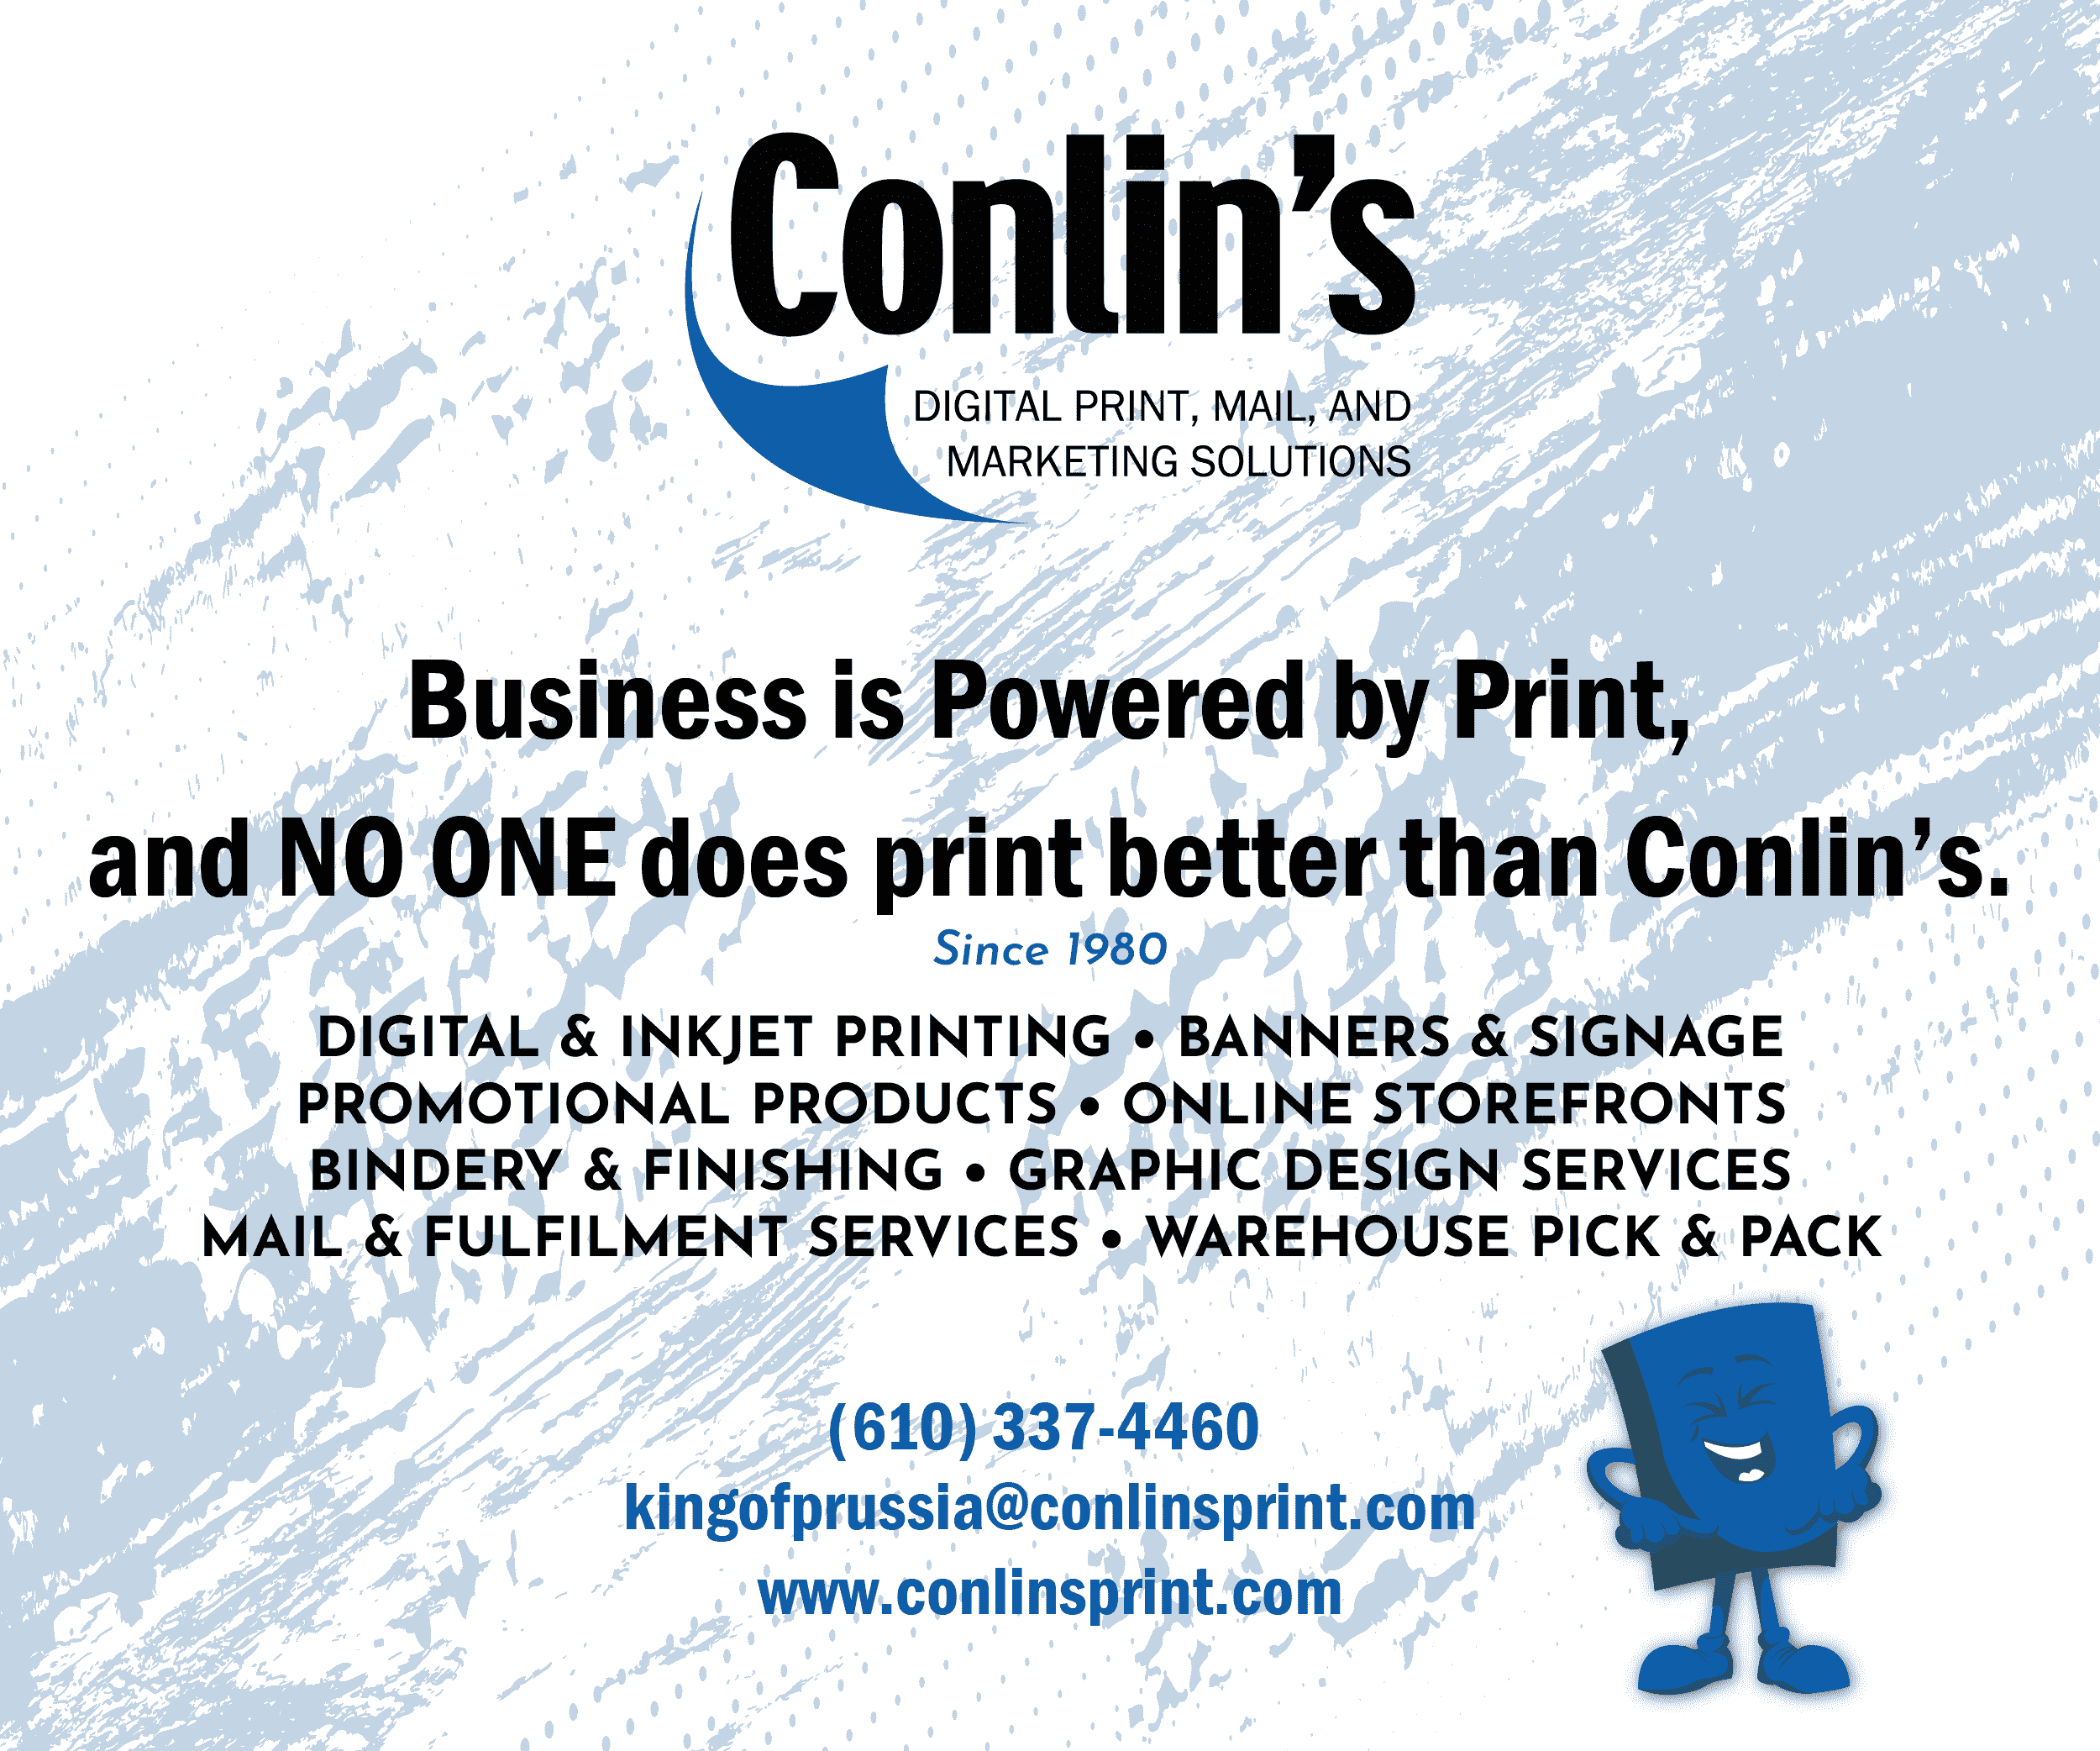 Ad for conlins print